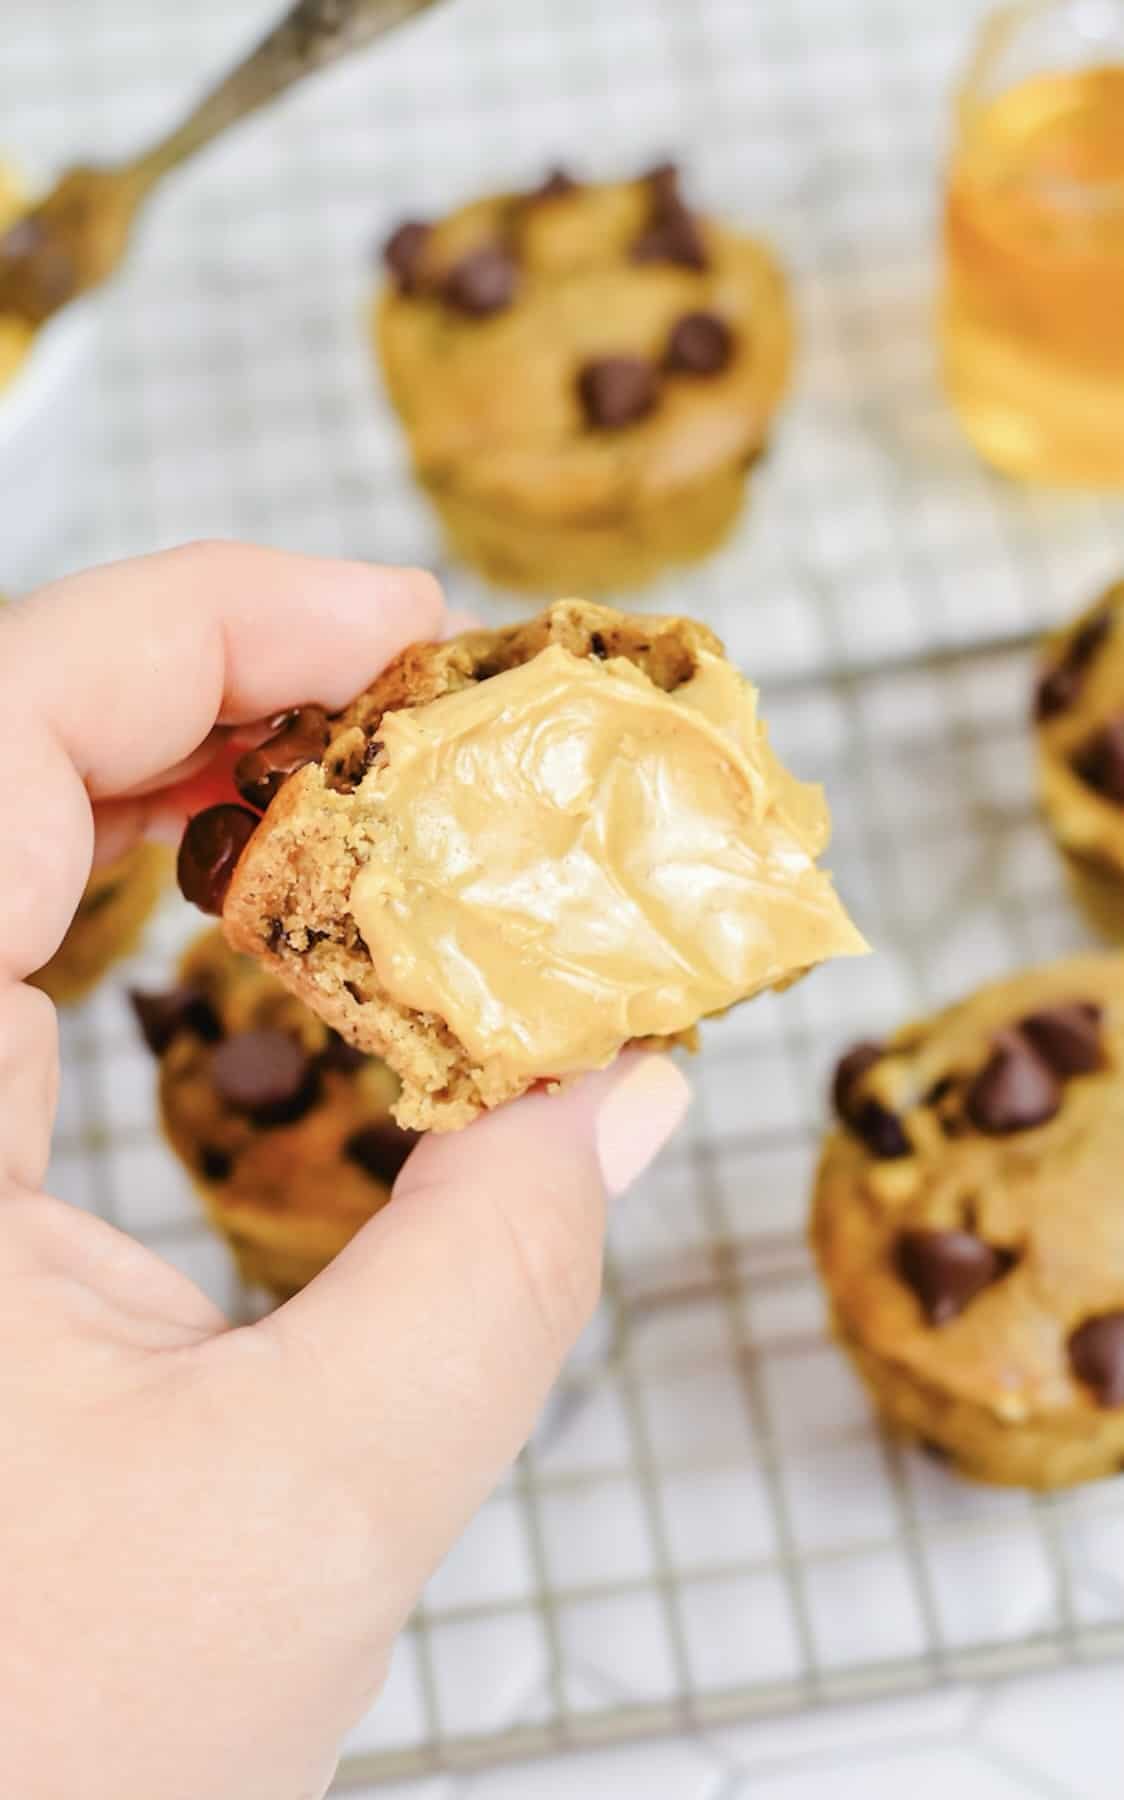 A person holding a muffin dipped in peanut butter.